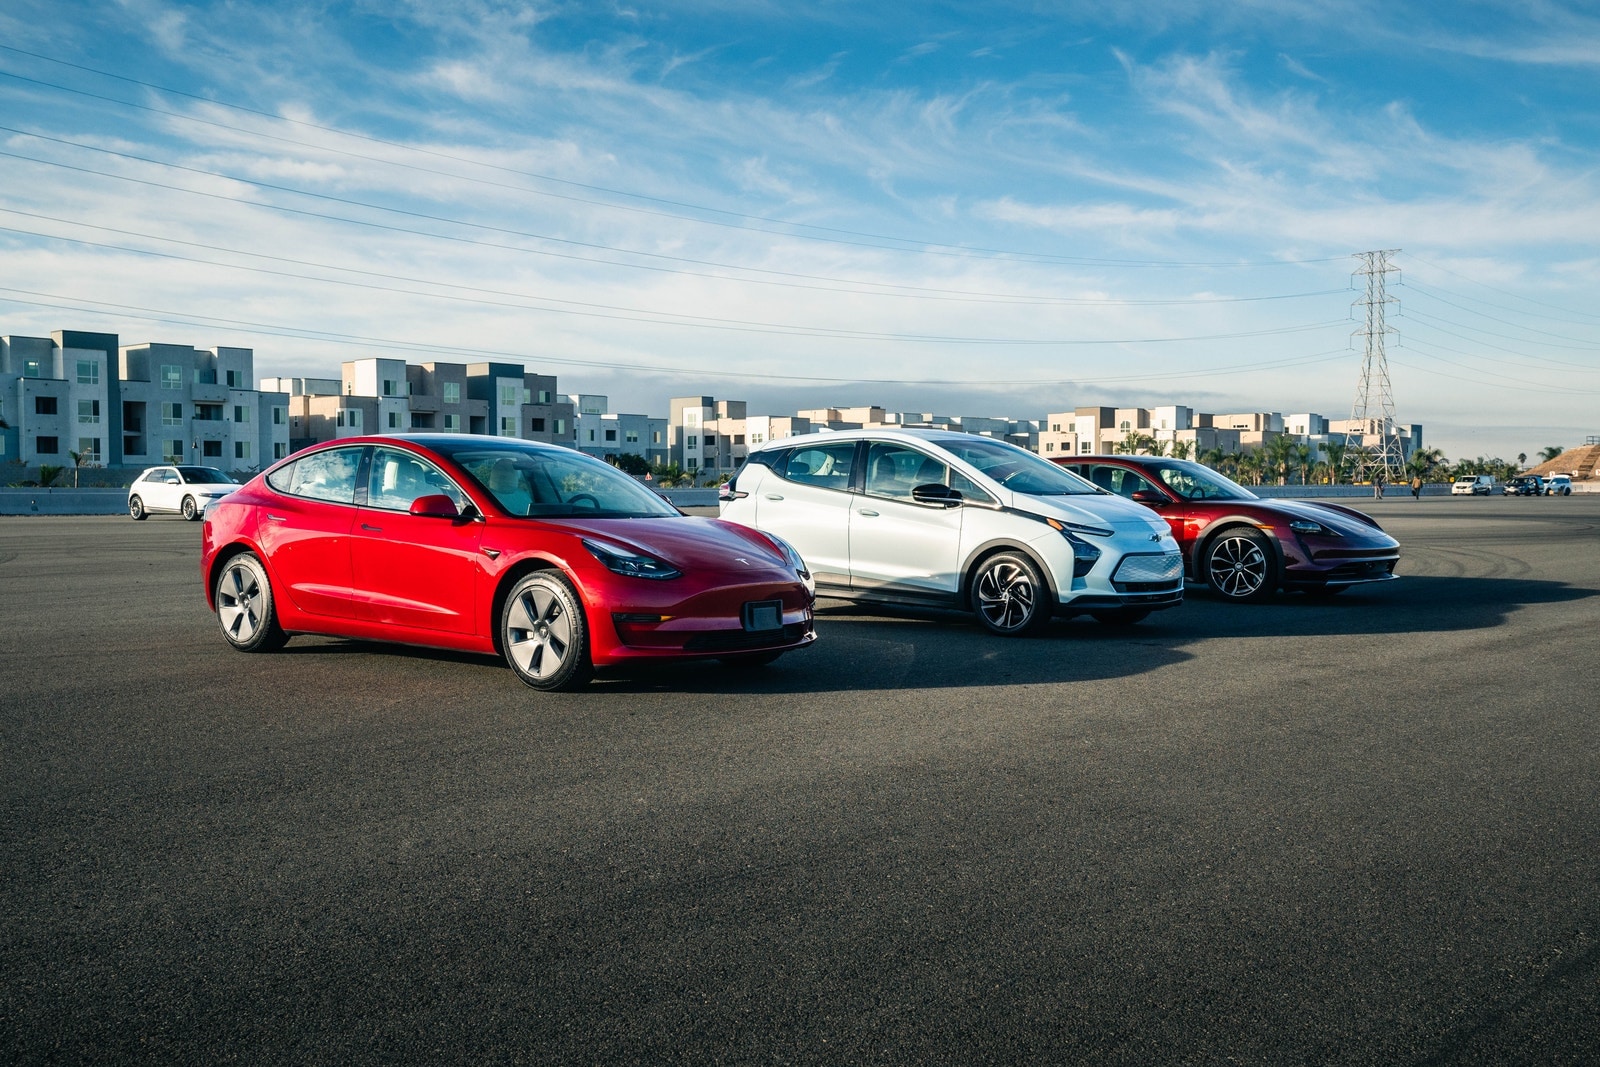 2023 Edmunds Top Rated Electric Car finalists: Tesla Model 3, Chevy Bolt and Porsche Taycan Cross Turismo